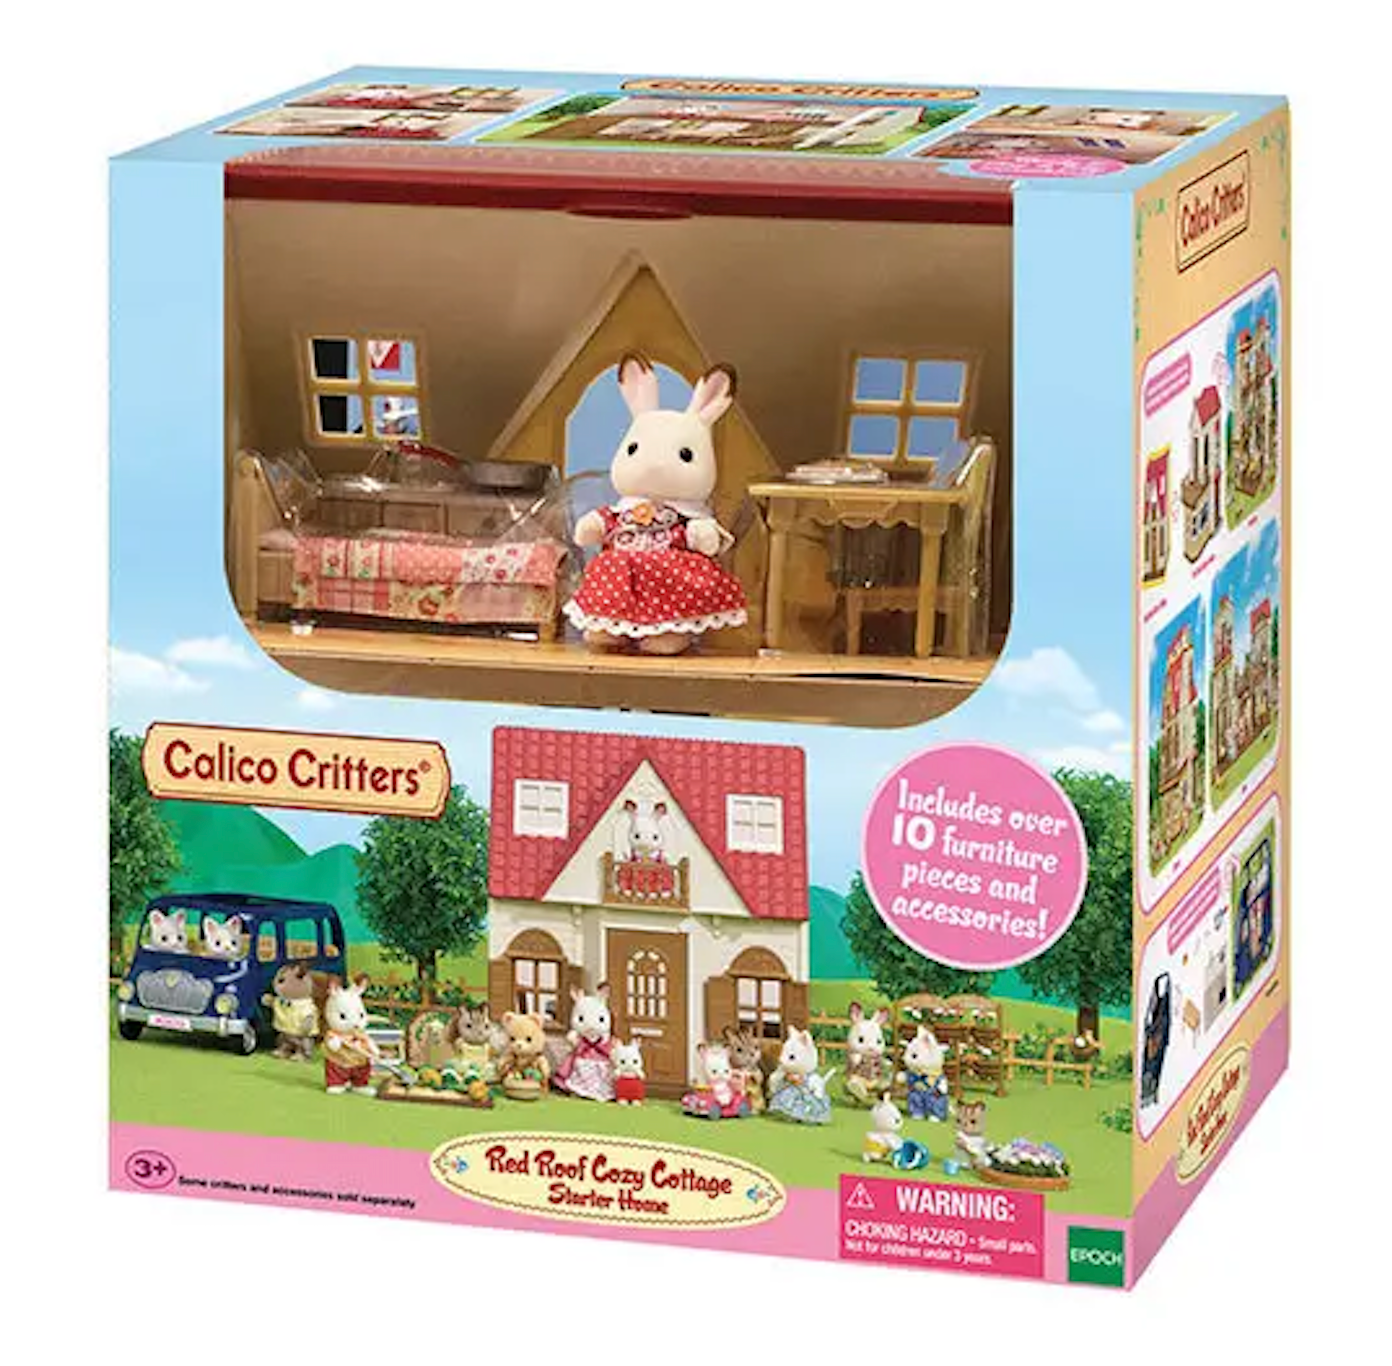 Calico Critters: Red Roof Cozy Cottage Starter Home